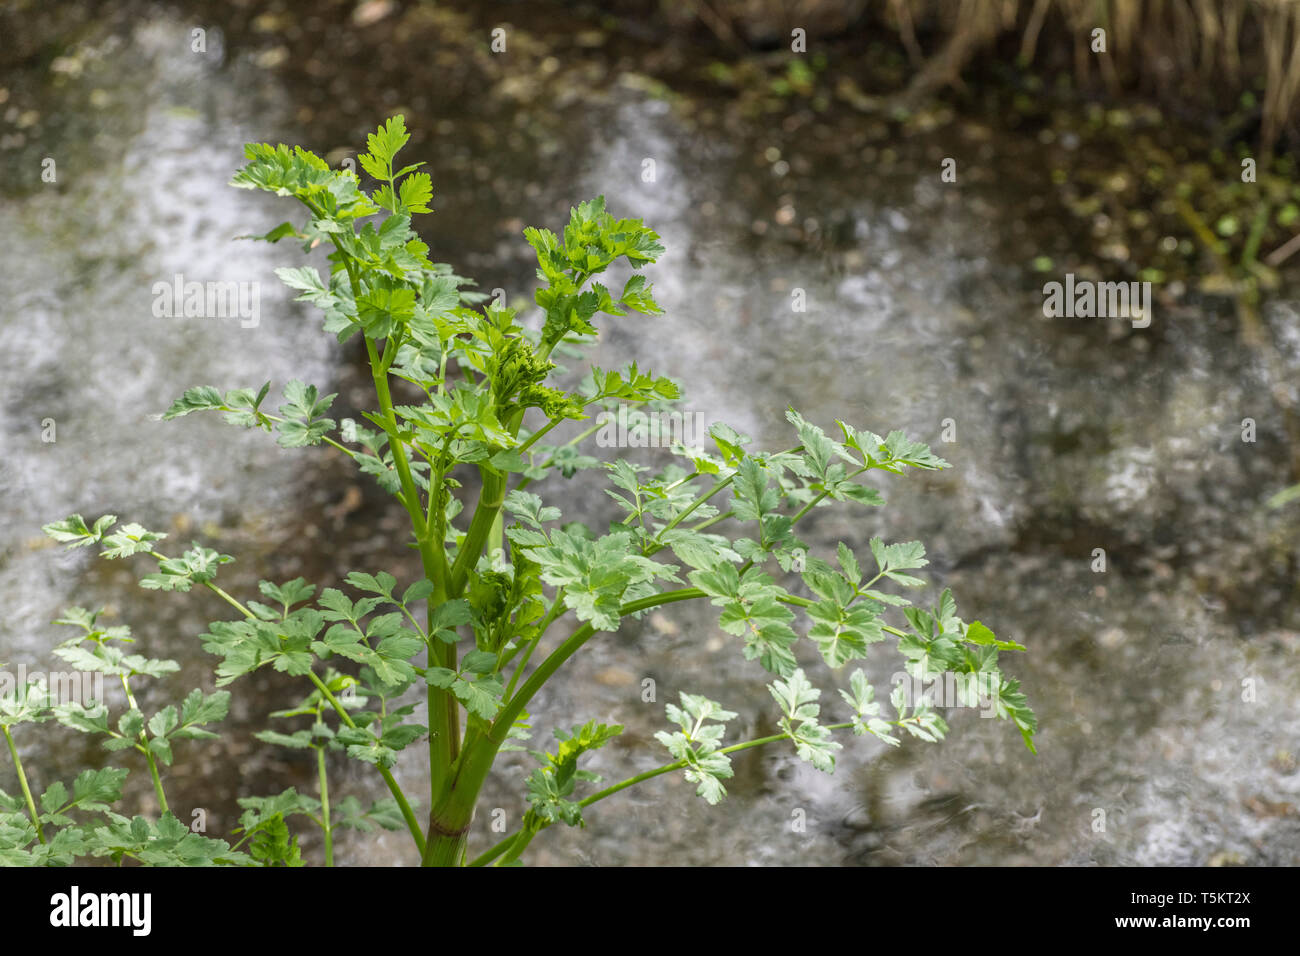 Young Spring foliage of a Hemlock Water-Dropwort / Oenanthe crocata plant beside a drainage ditch. Highly poisonous plant with affinity for water. Stock Photo